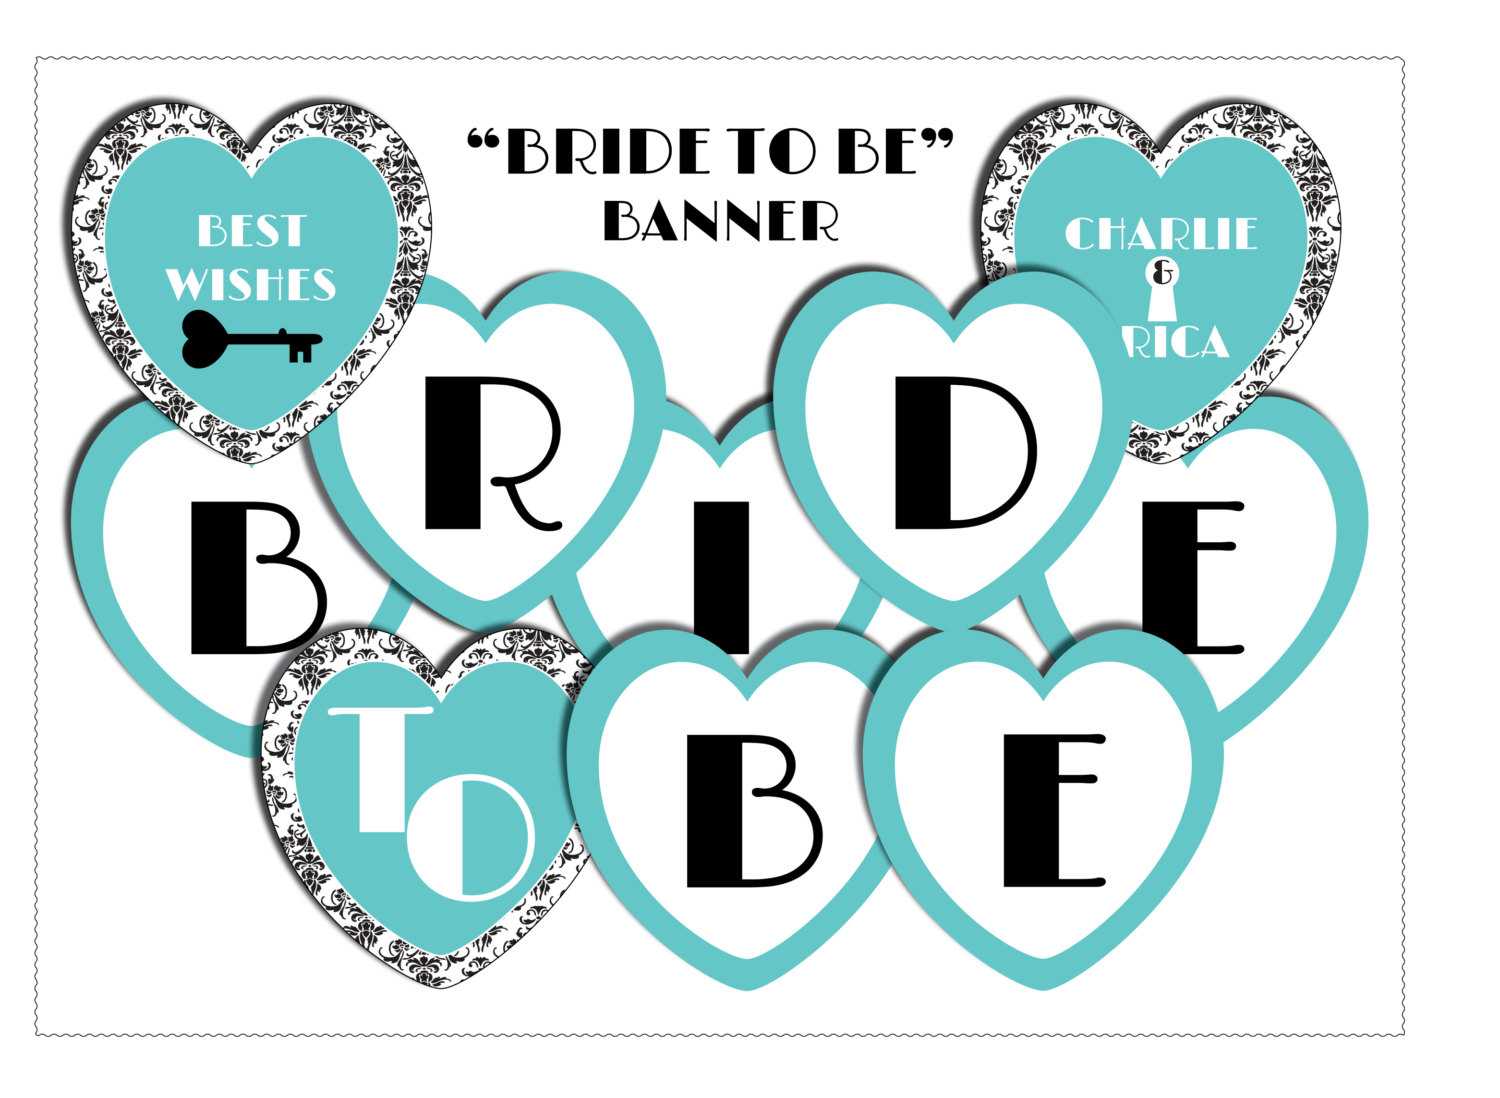 11 Best Photos Of Bride To Be Banner Template - Diy Bridal Intended For Bride To Be Banner Template